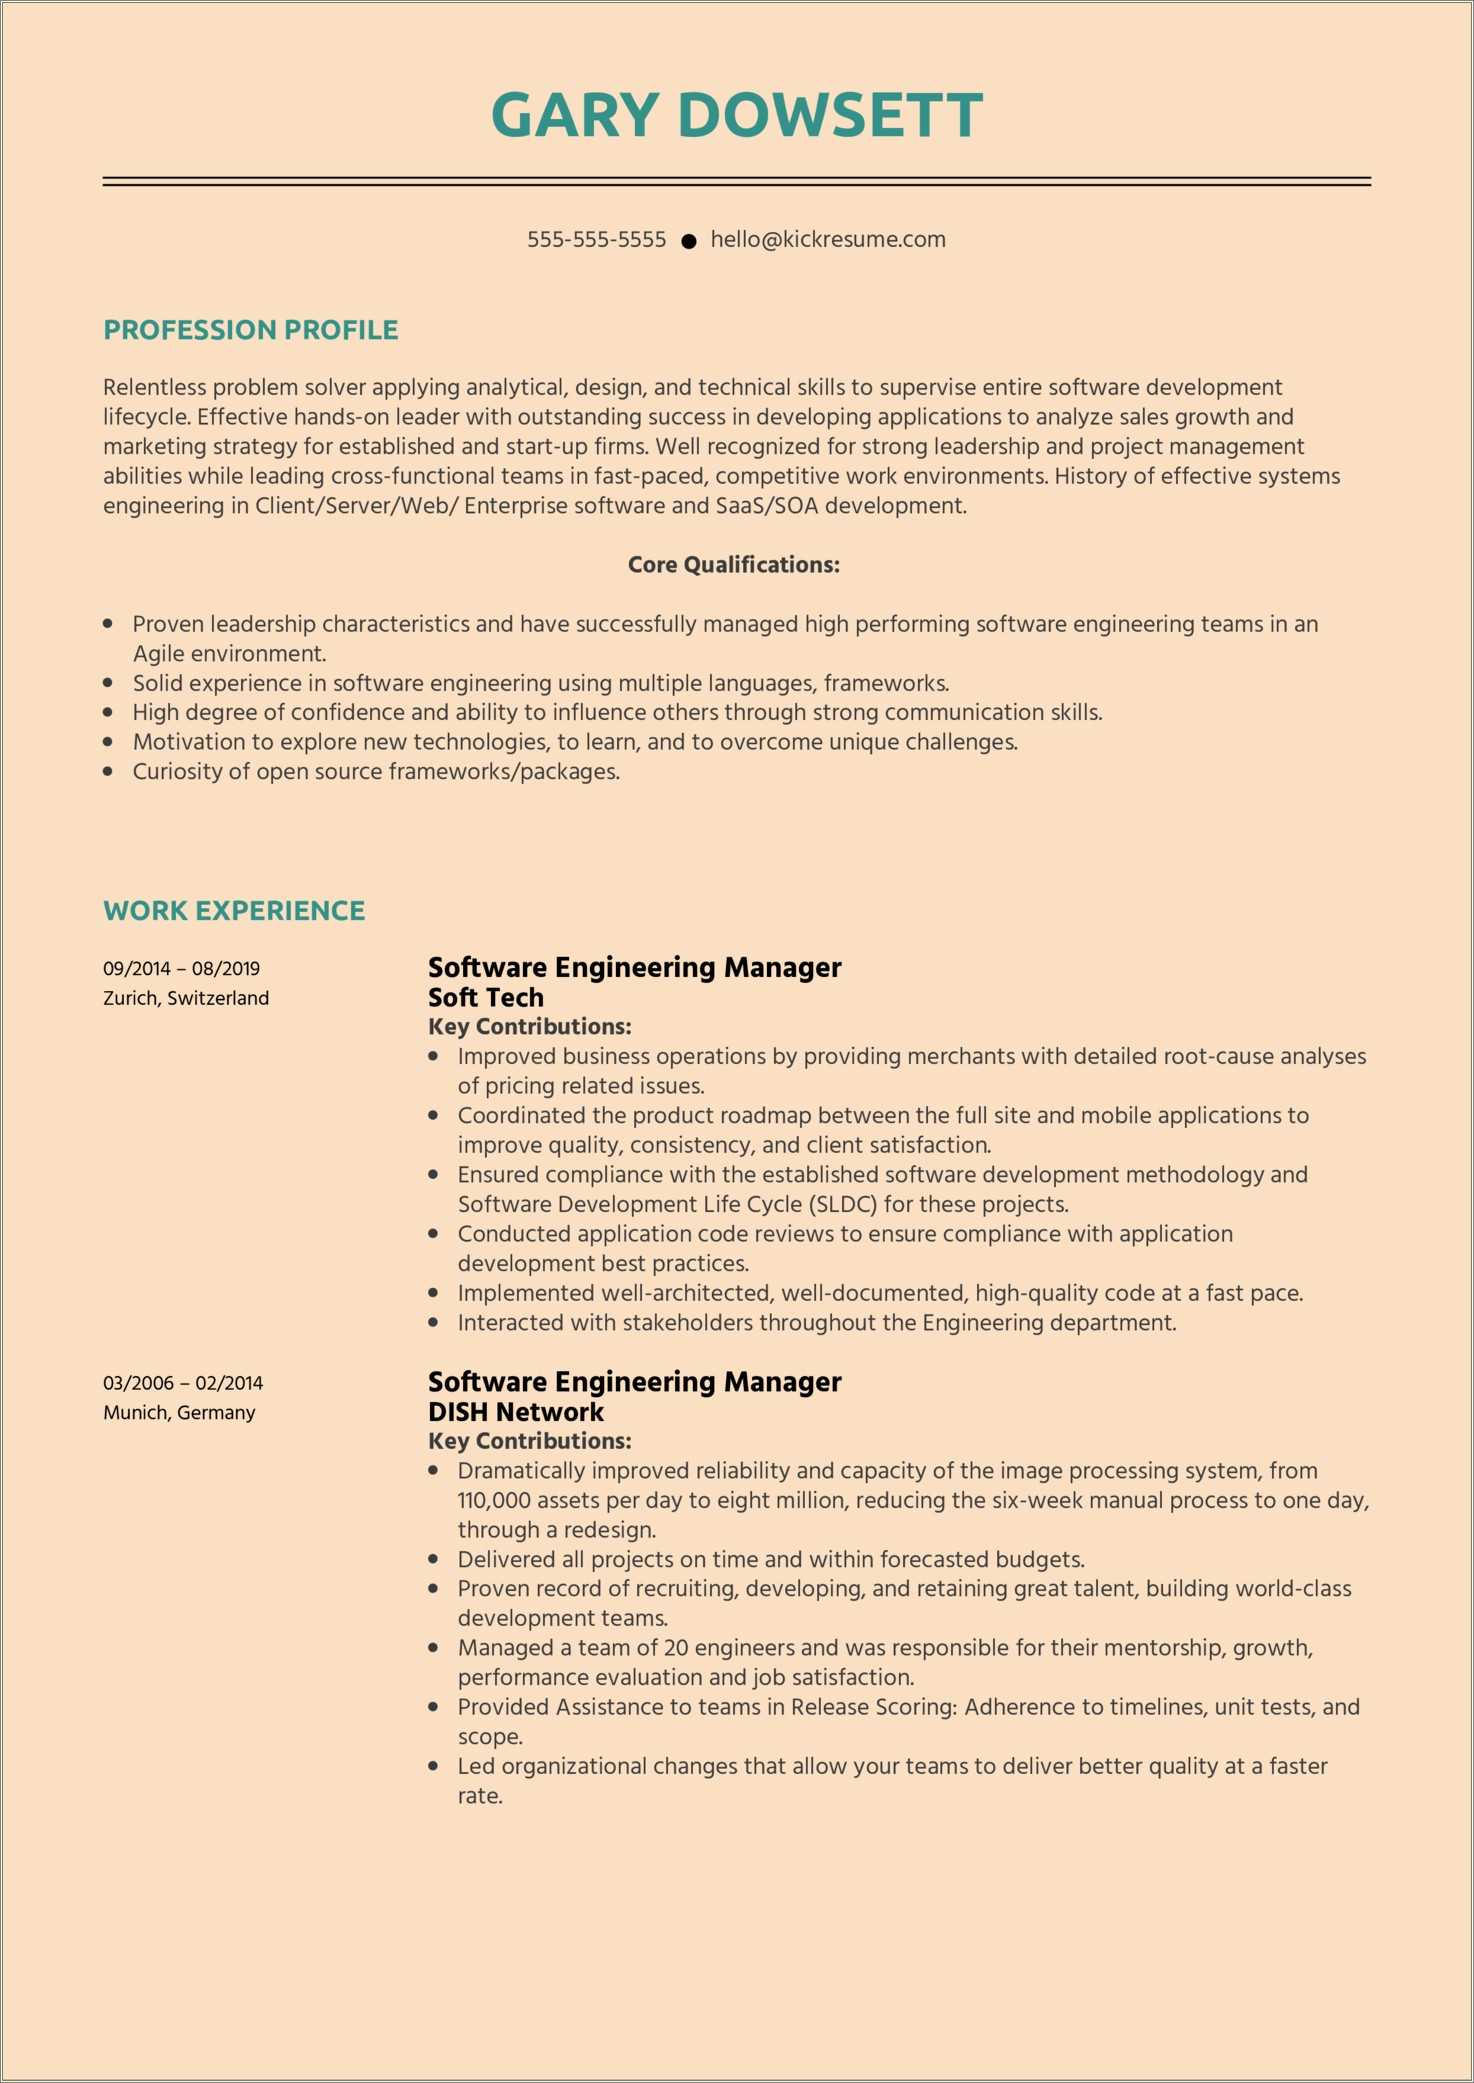 Project Manager Software Development Resume - Resume Example Gallery